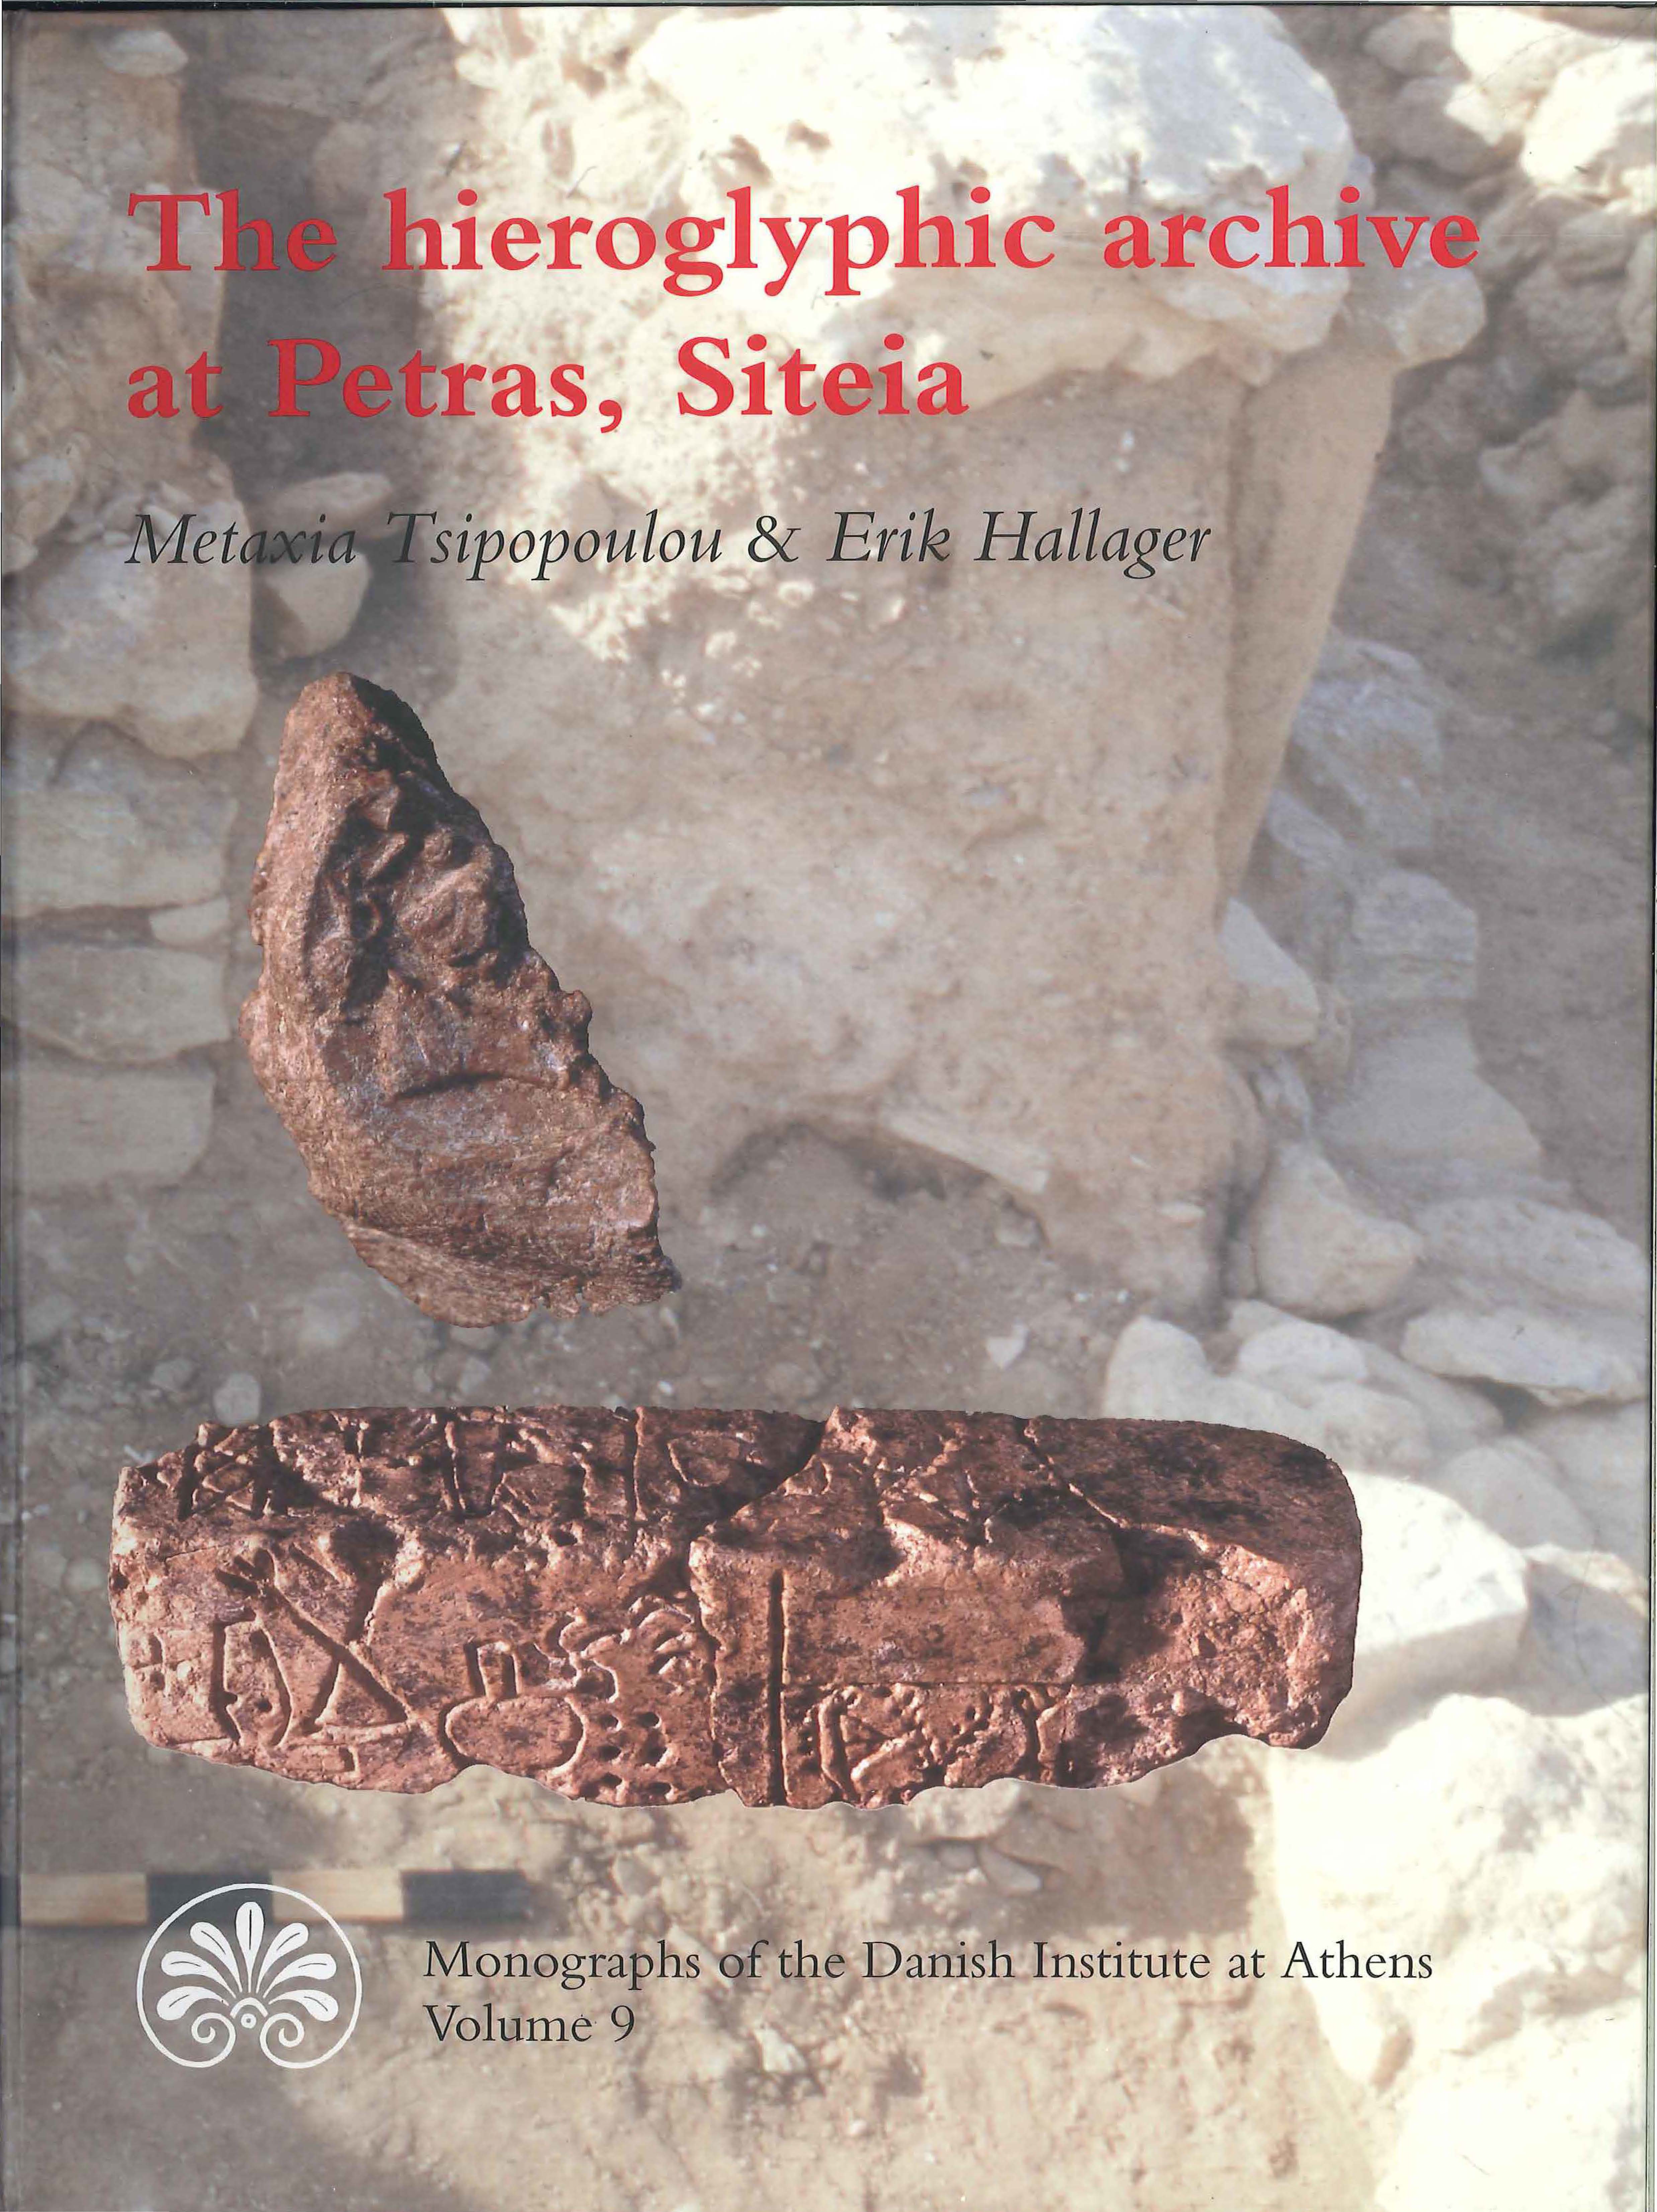 					View Vol. 9 (2010): The hieroglyphic archive at Petras, Siteia
				